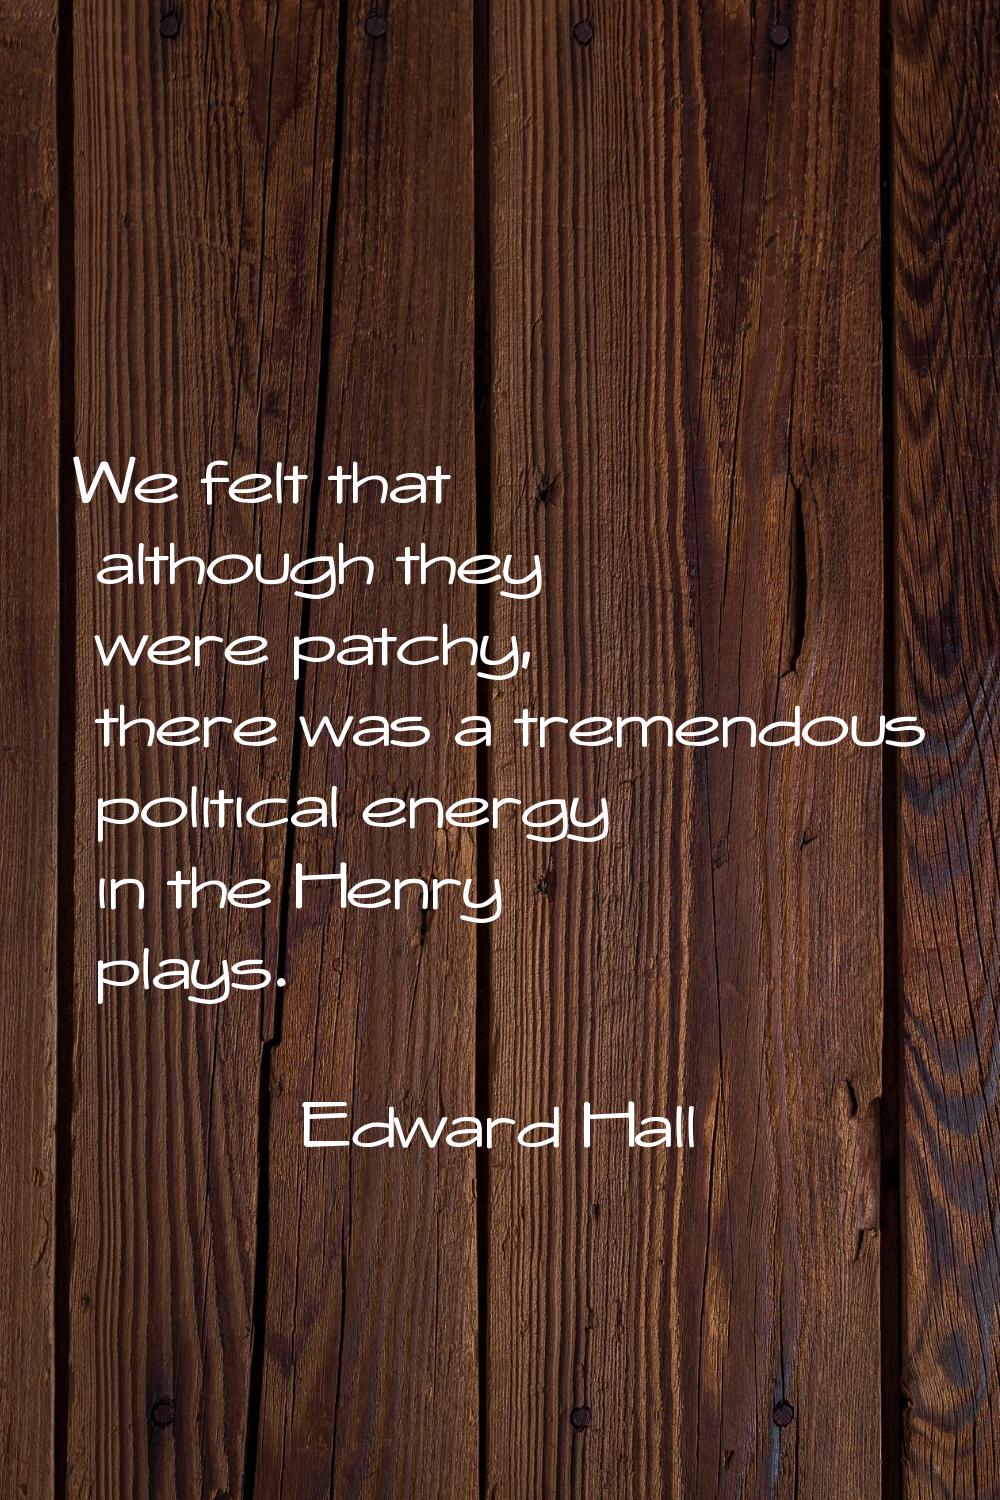 We felt that although they were patchy, there was a tremendous political energy in the Henry plays.